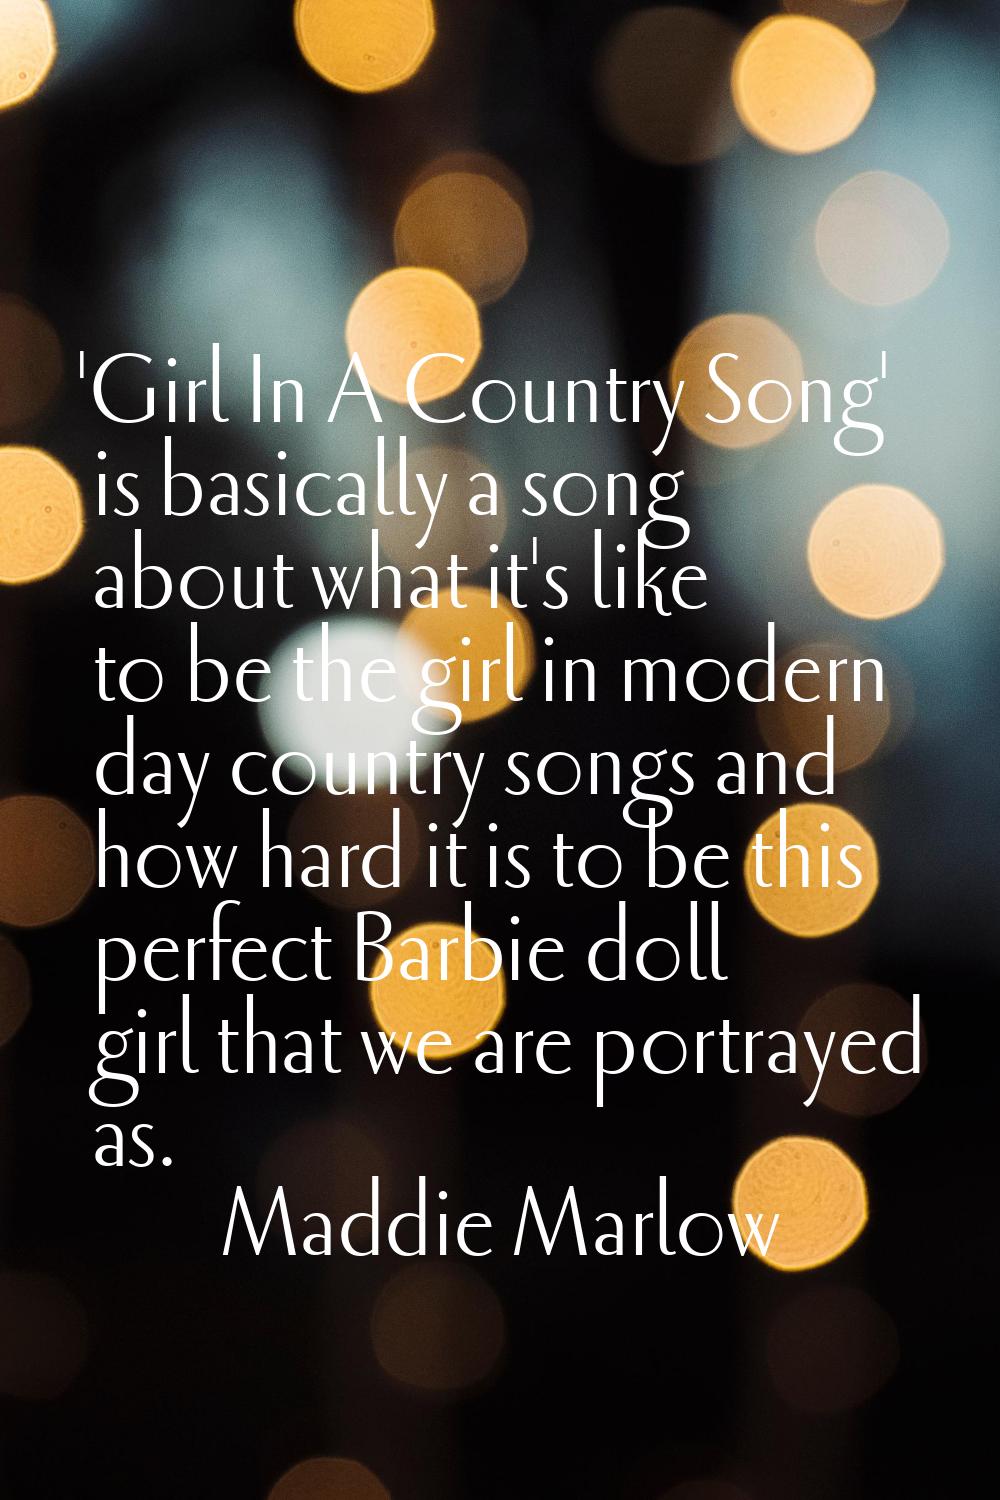 'Girl In A Country Song' is basically a song about what it's like to be the girl in modern day coun